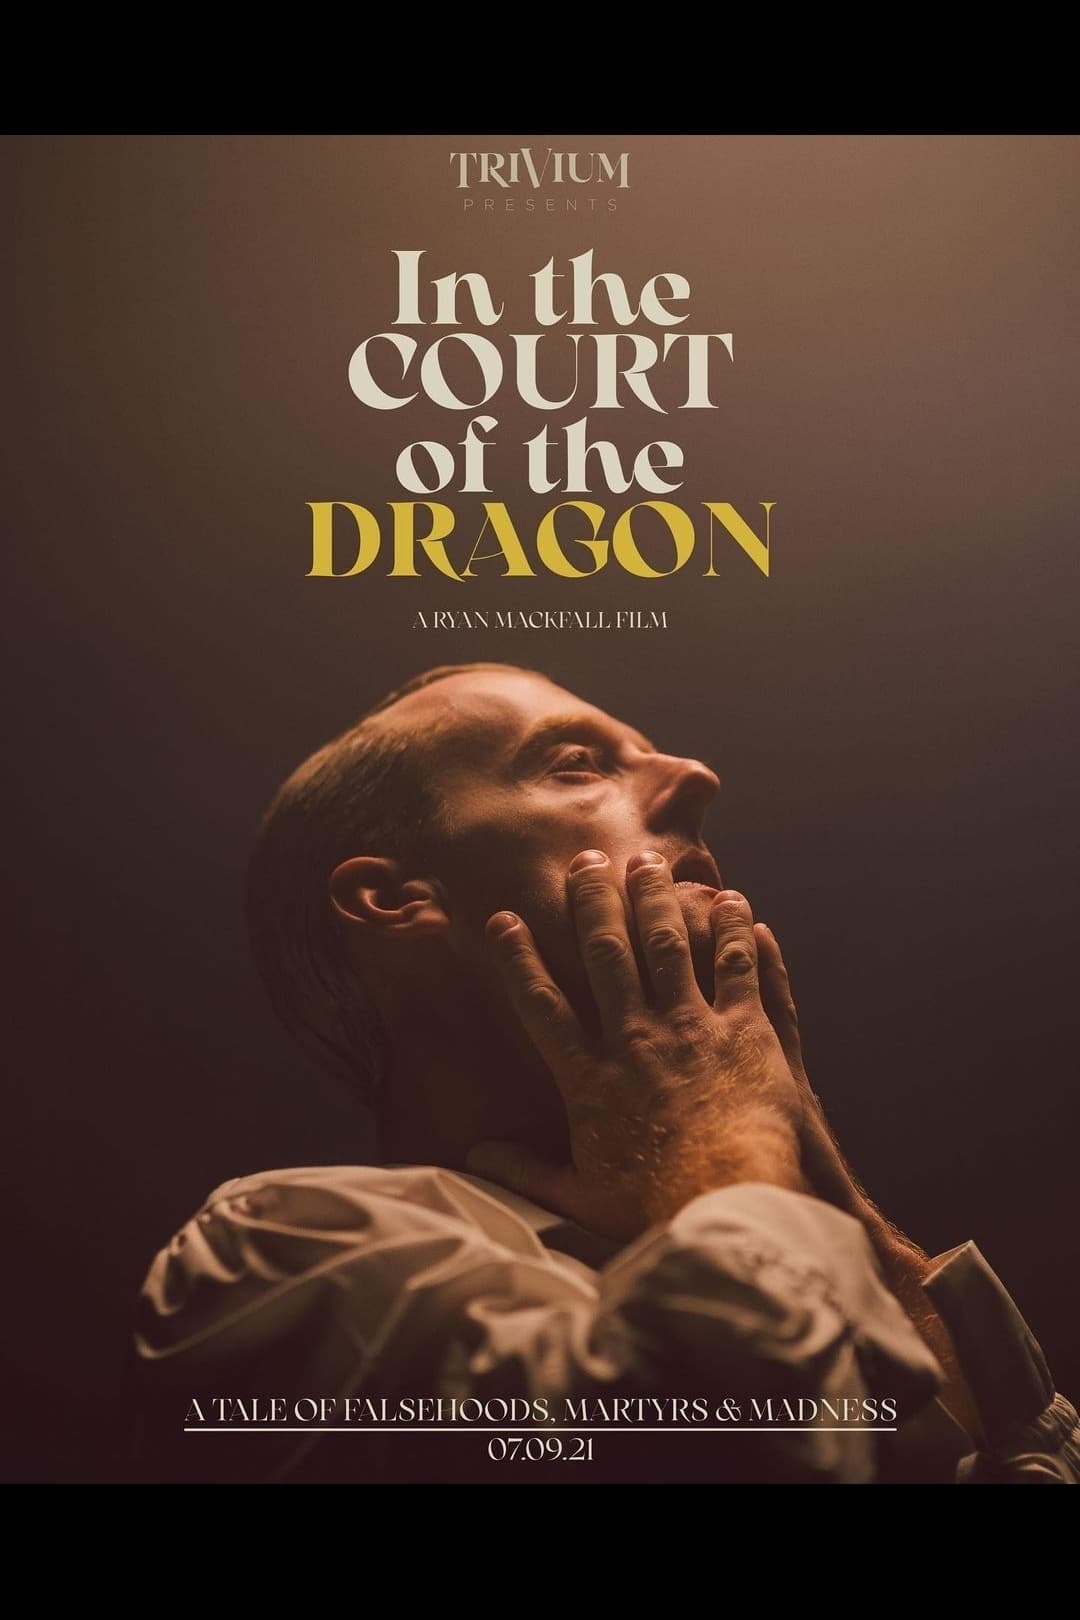 Trivium: In the Court of the Dragon